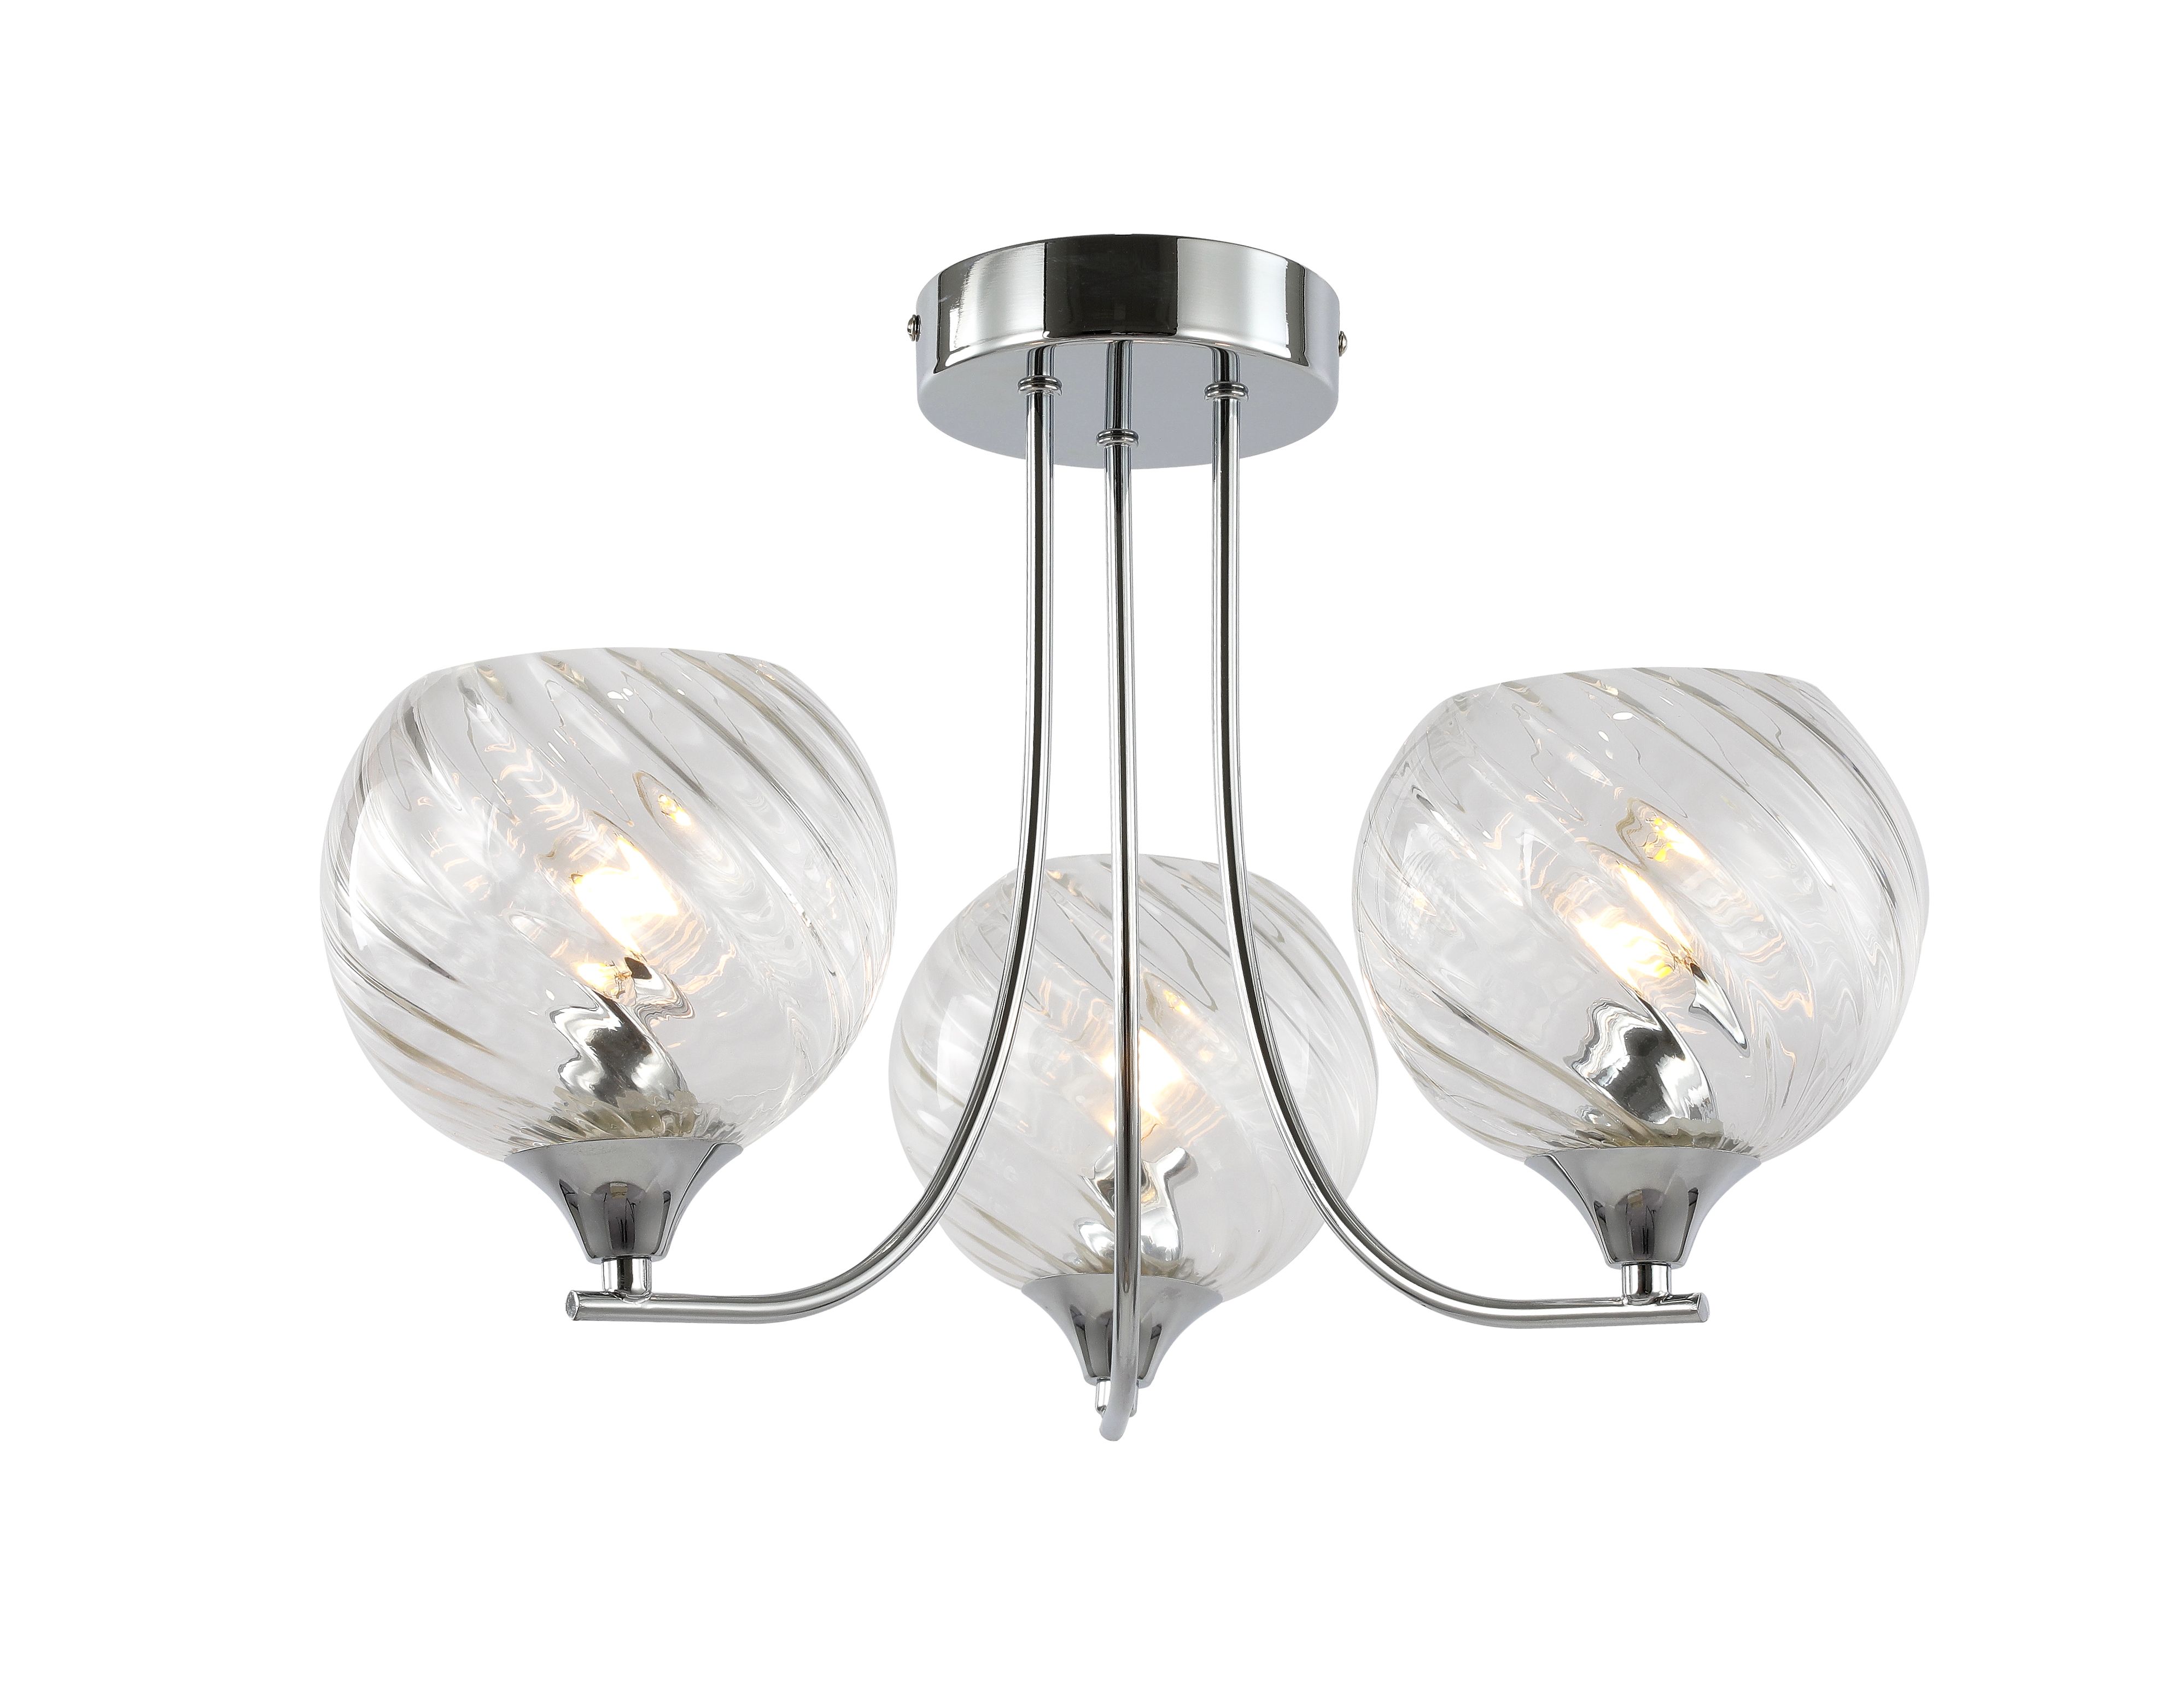 GoodHome Round Glass & metal Chrome 3 Lamp LED Ceiling light